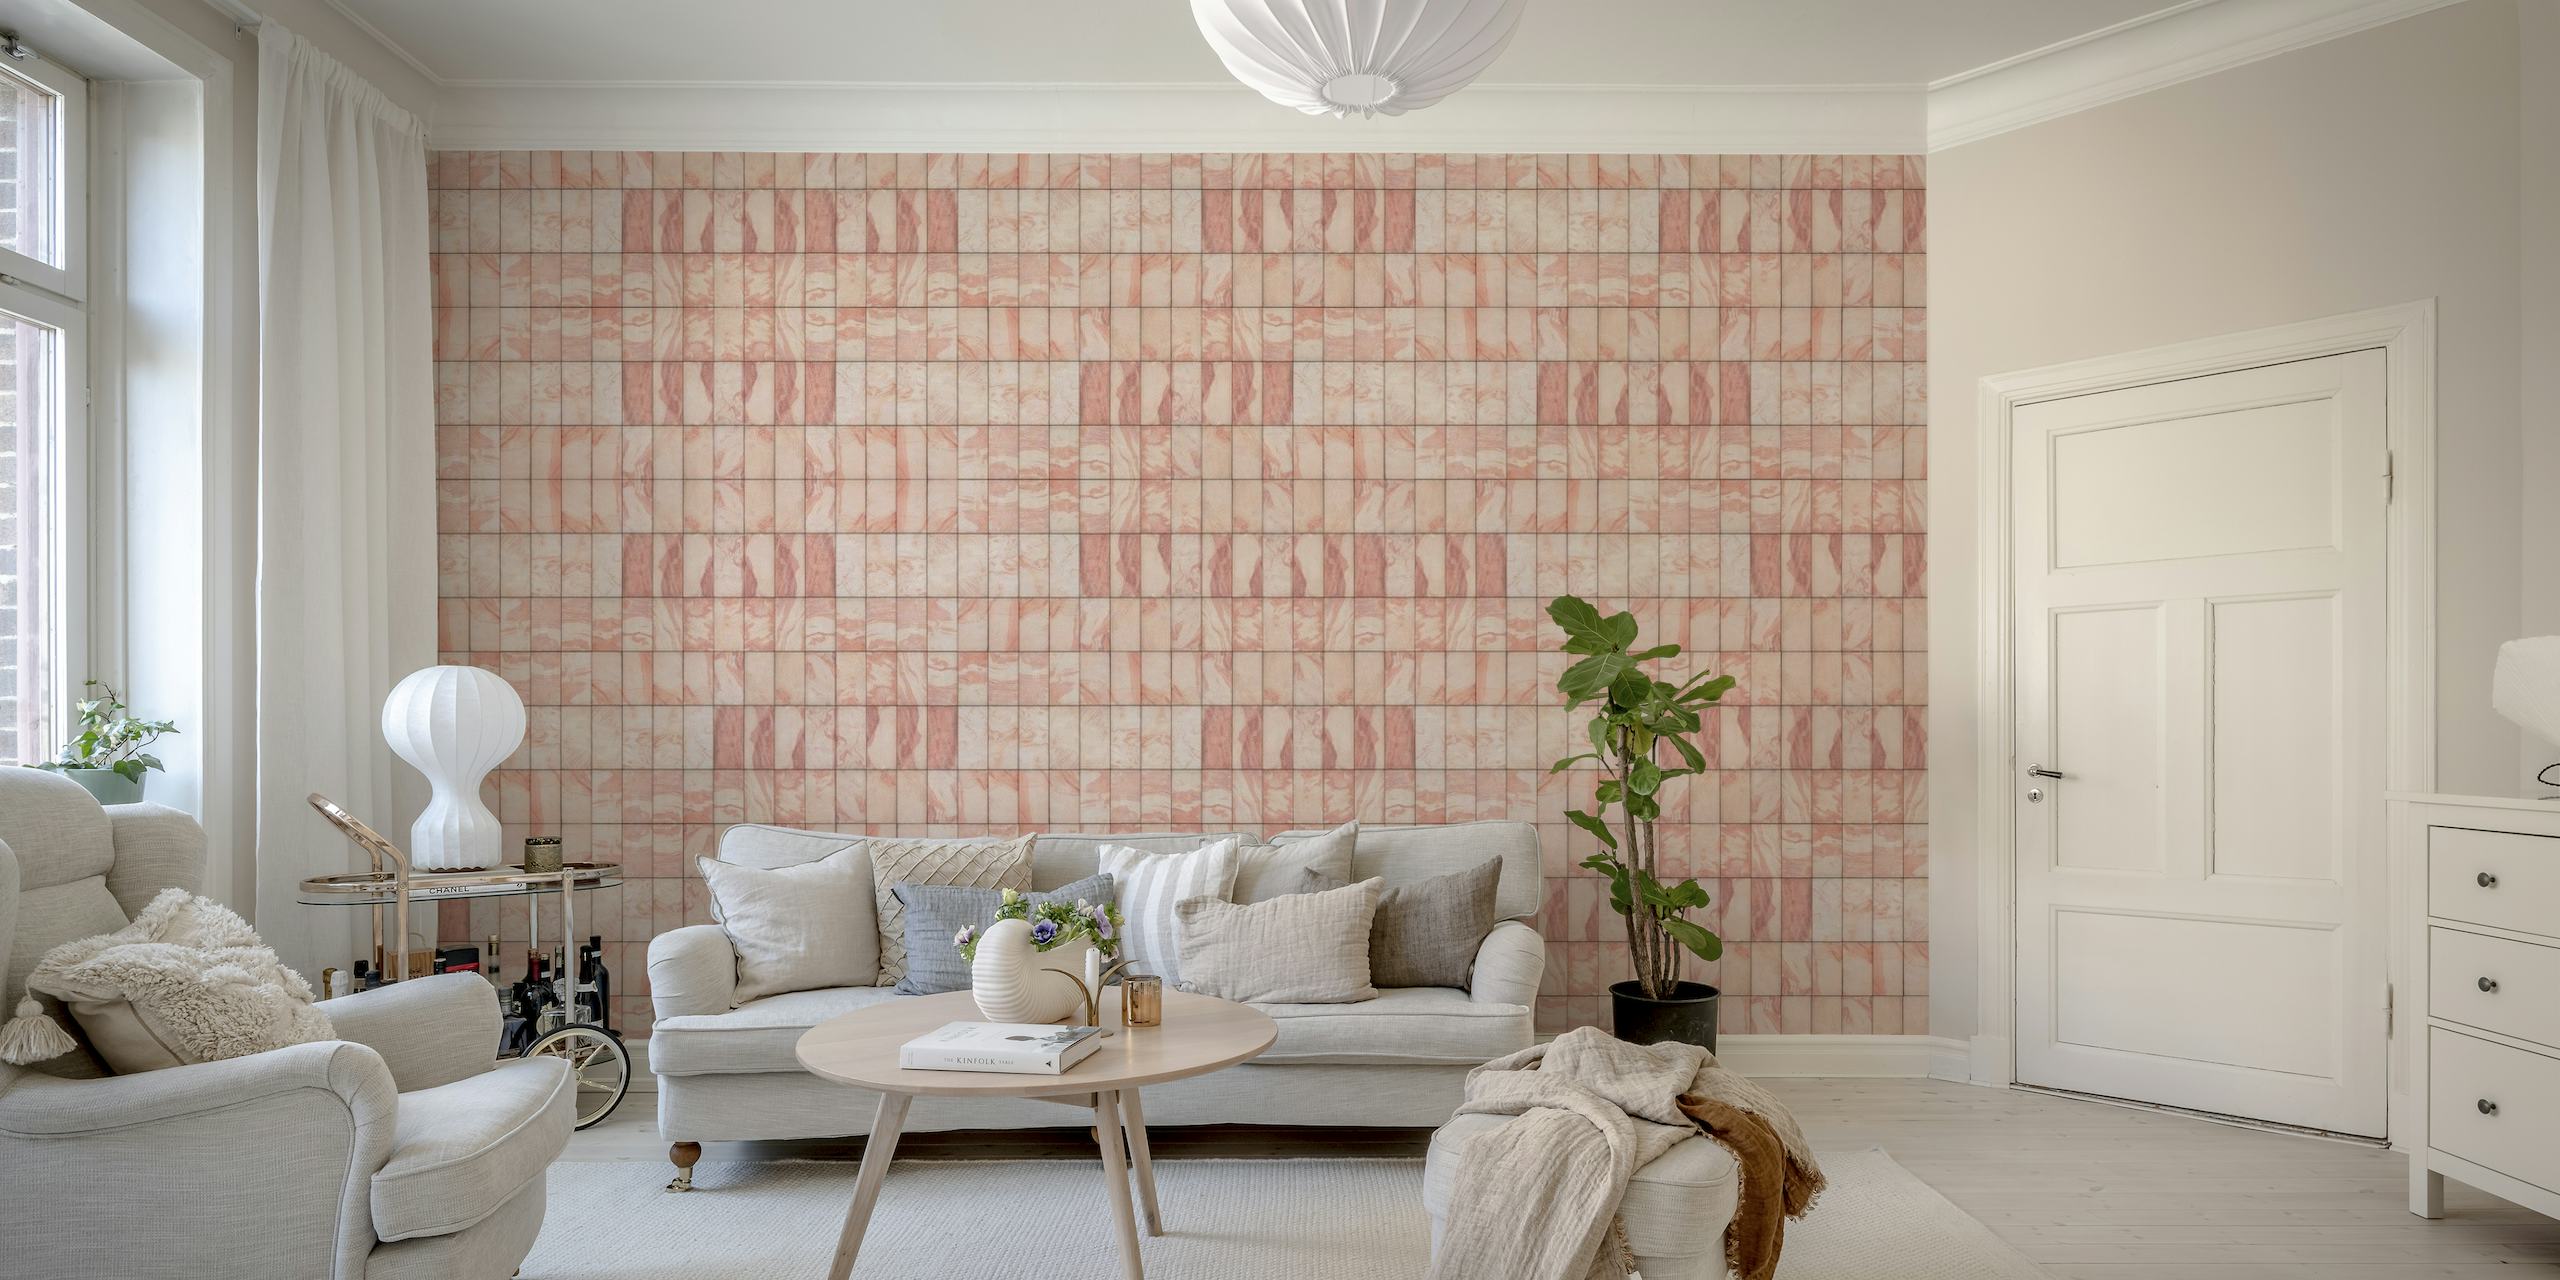 Indian Pattern Rose wall mural with pink and cream traditional motifs